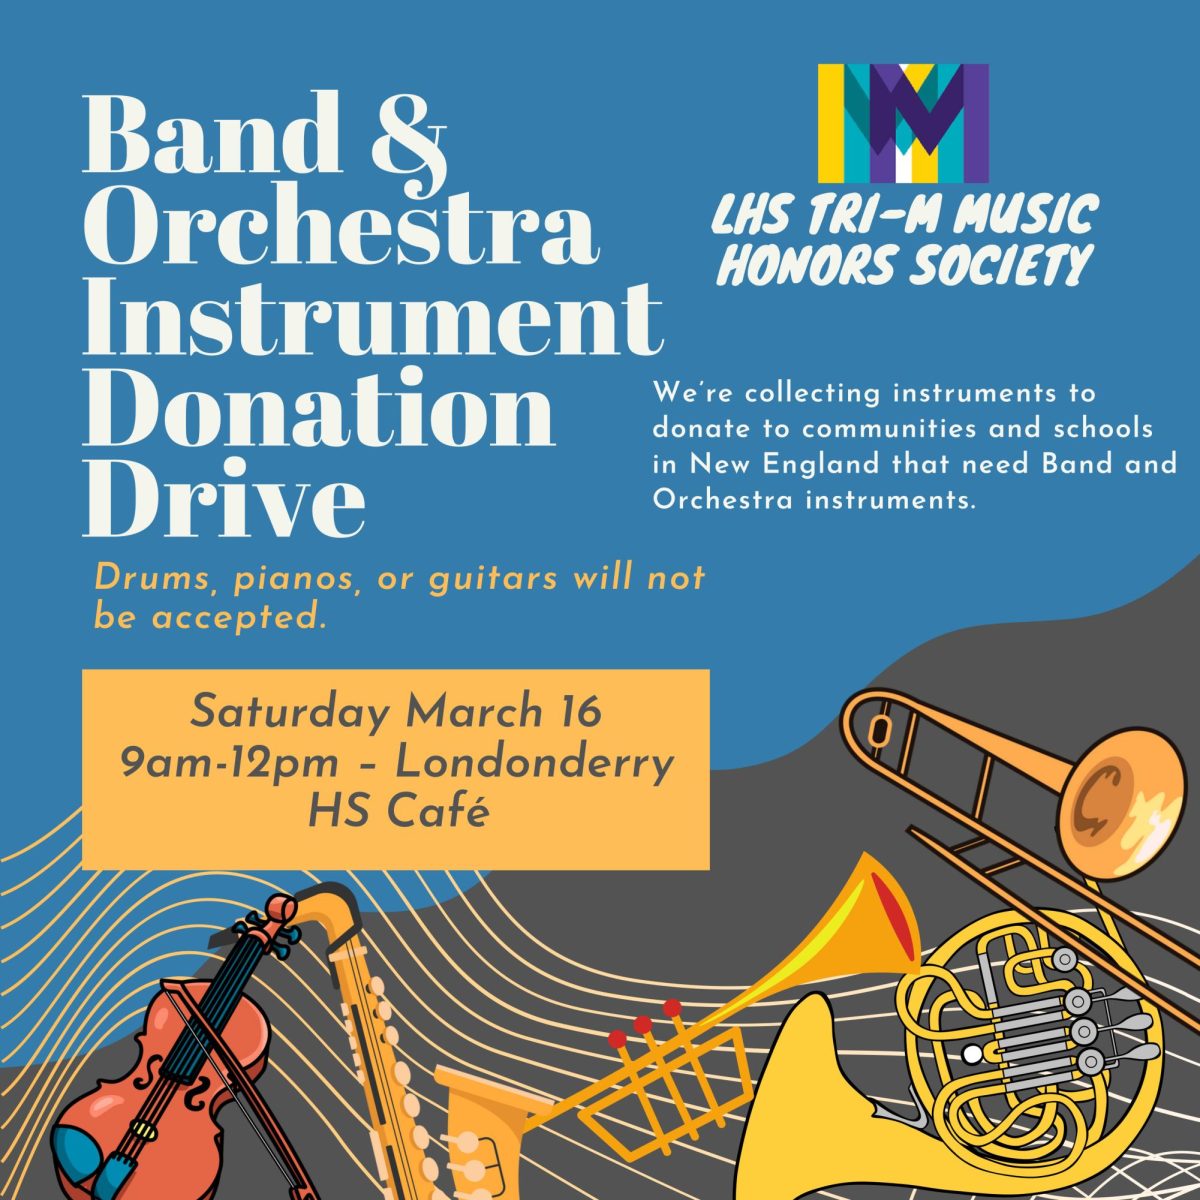 Tri-M+members+urge+community+members+to+donate+any+unused+instruments+to+help+better+New+Hampshire+schools+music+departments.+Image+provided+by+Joseph+Cain